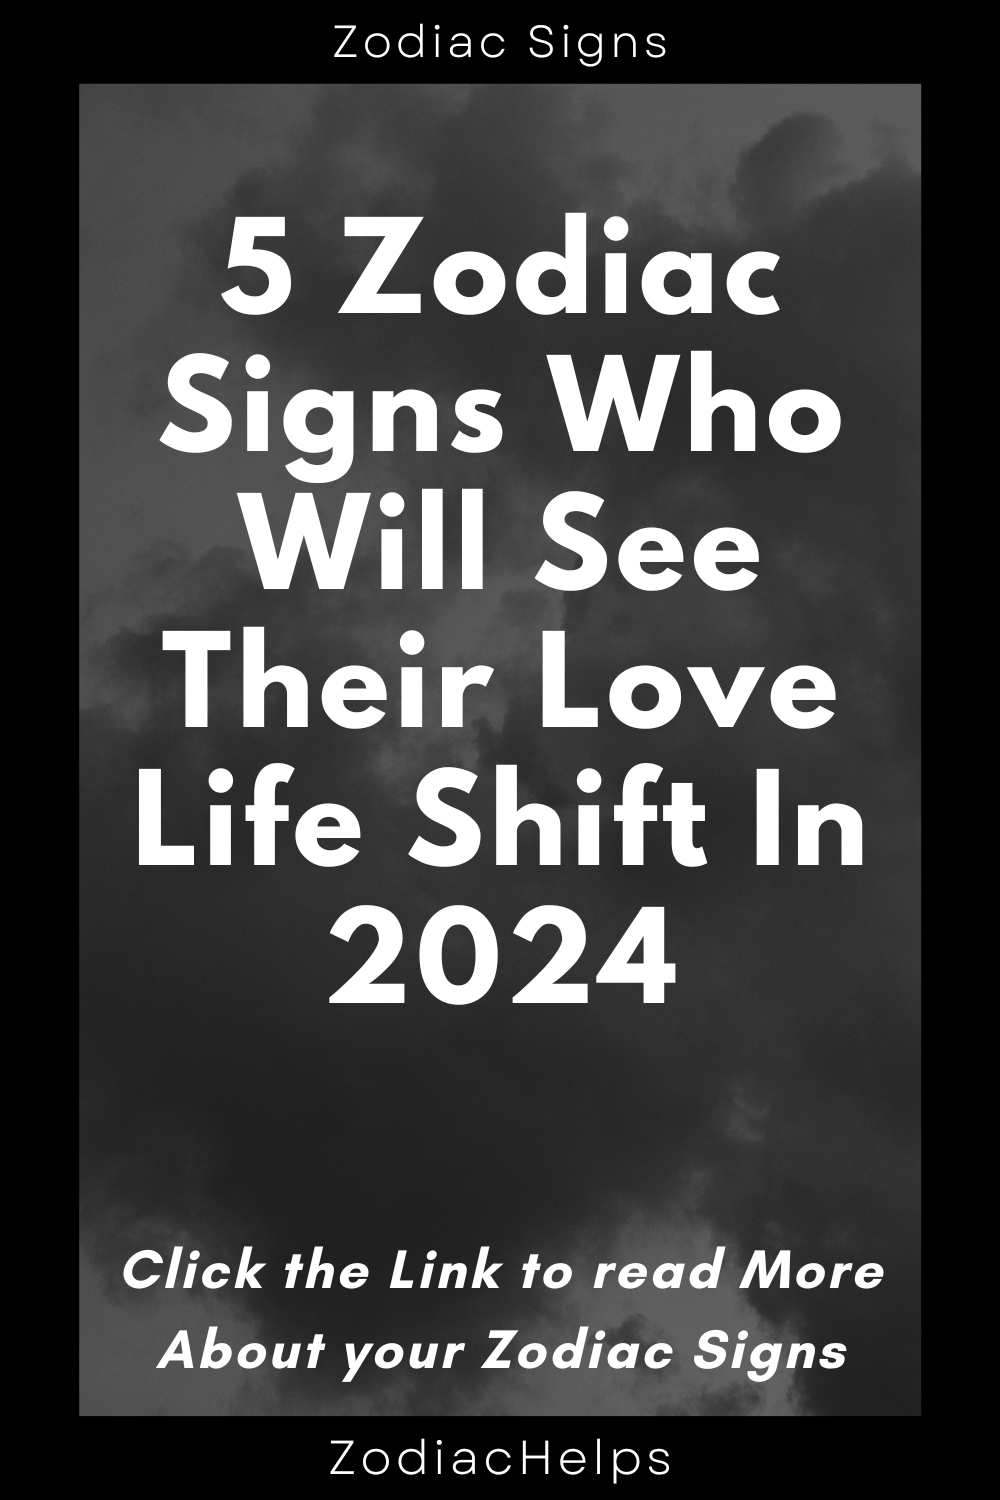 5 Zodiac Signs Who Will See Their Love Life Shift In 2024